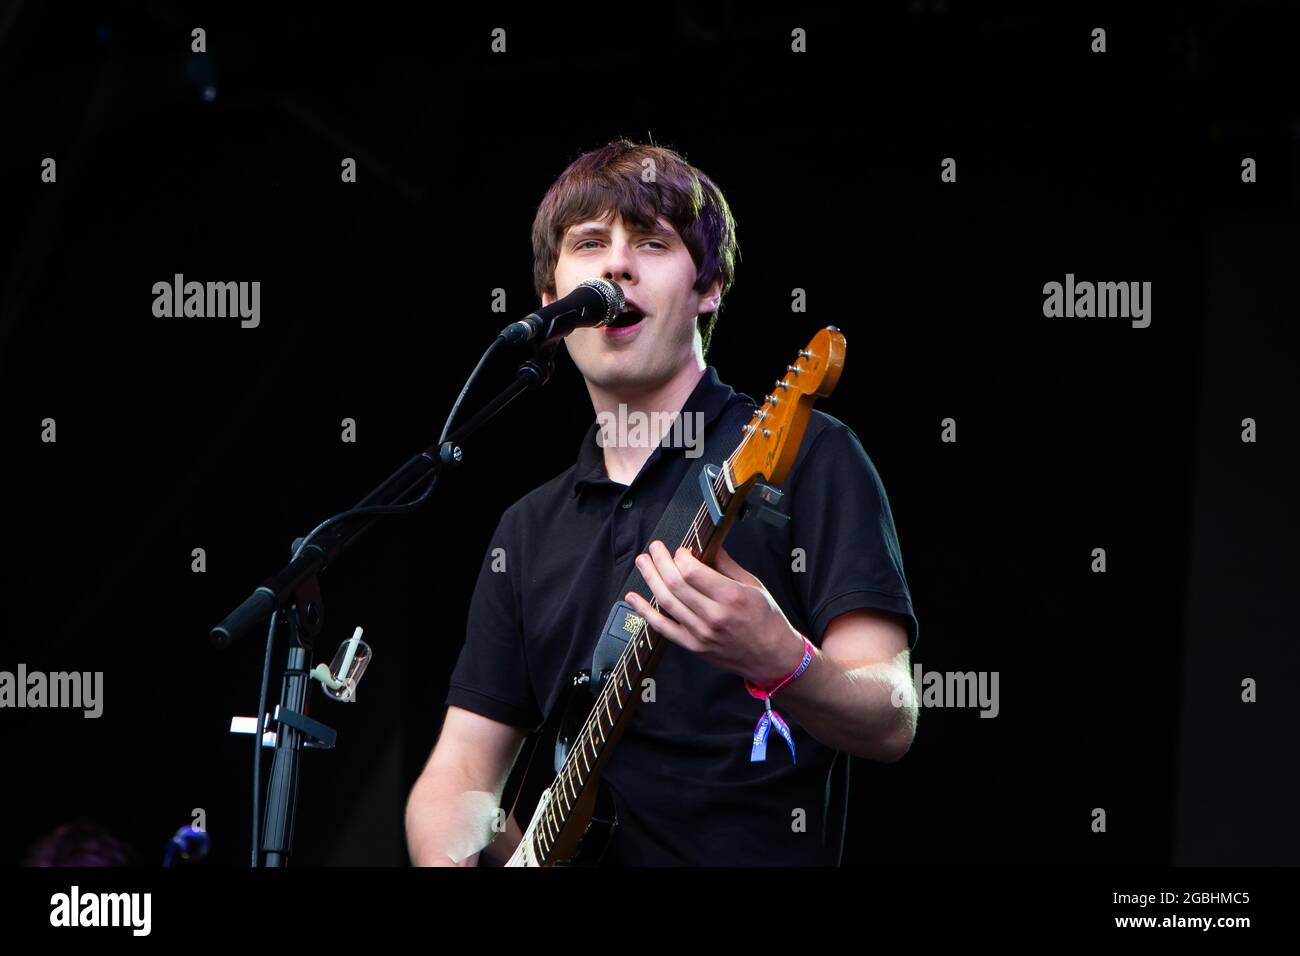 Jake Bugg - Standon Calling Music Festival 2021, Hertfordshire, July 22nd - 25th 2021   Must credit Amy Smirk Stock Photo